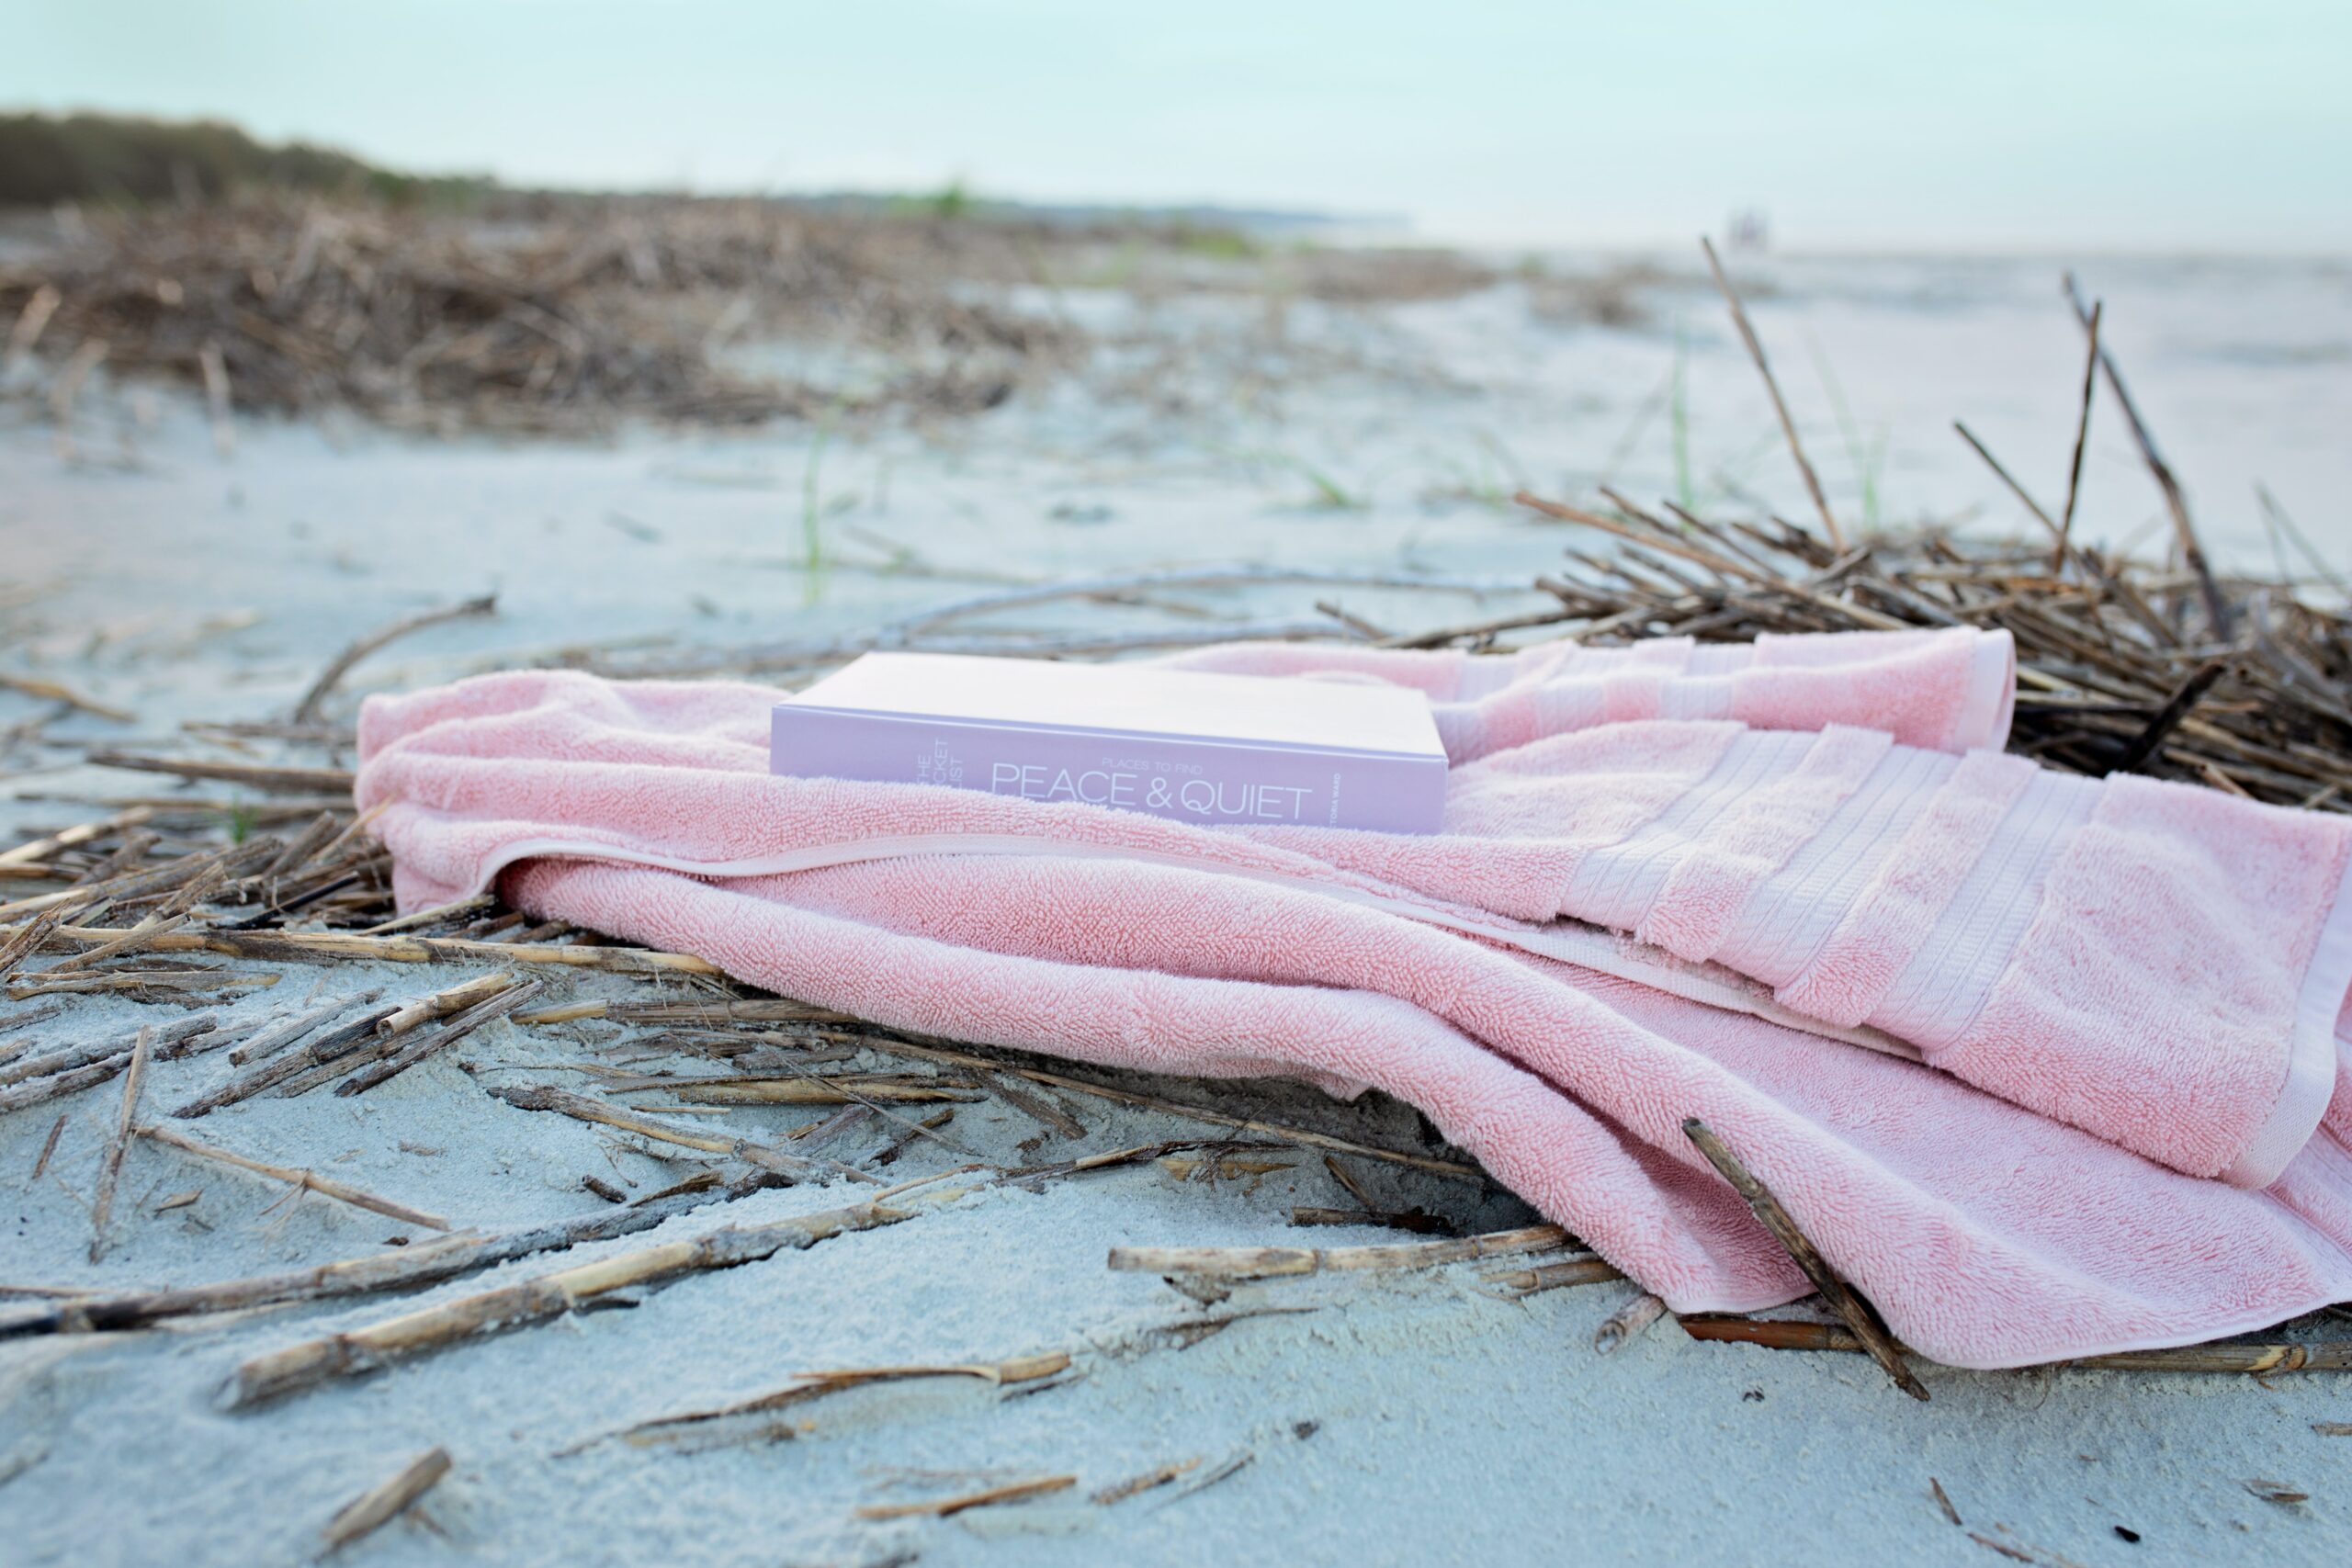 book-on-pink-textile-on-sand-during-day